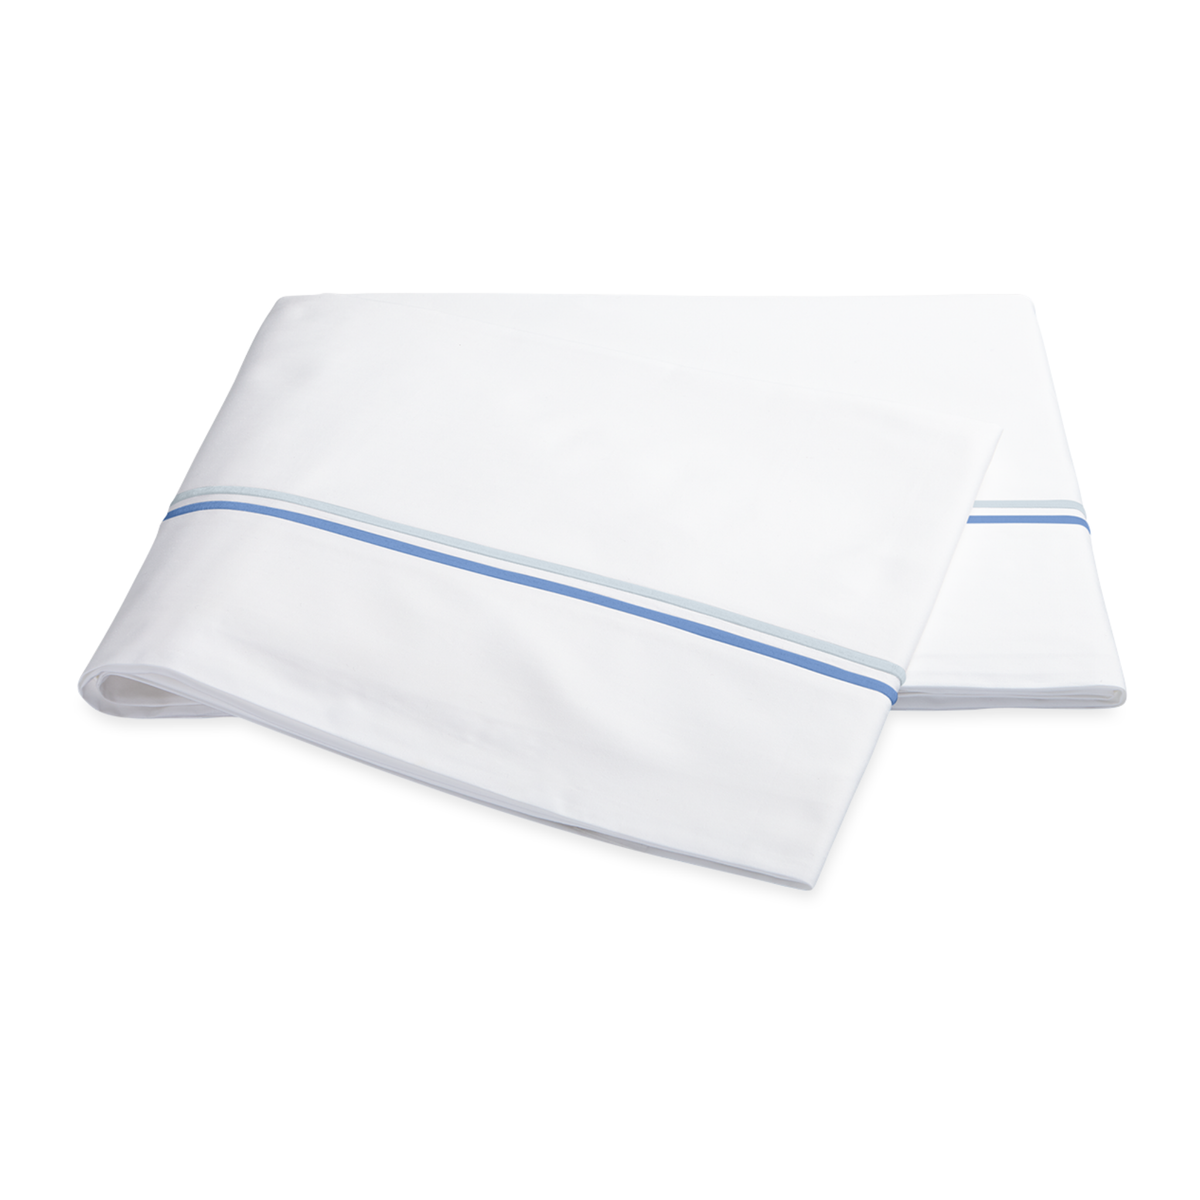 Flat Sheet of Matouk Essex Bedding Collection in Azure Color